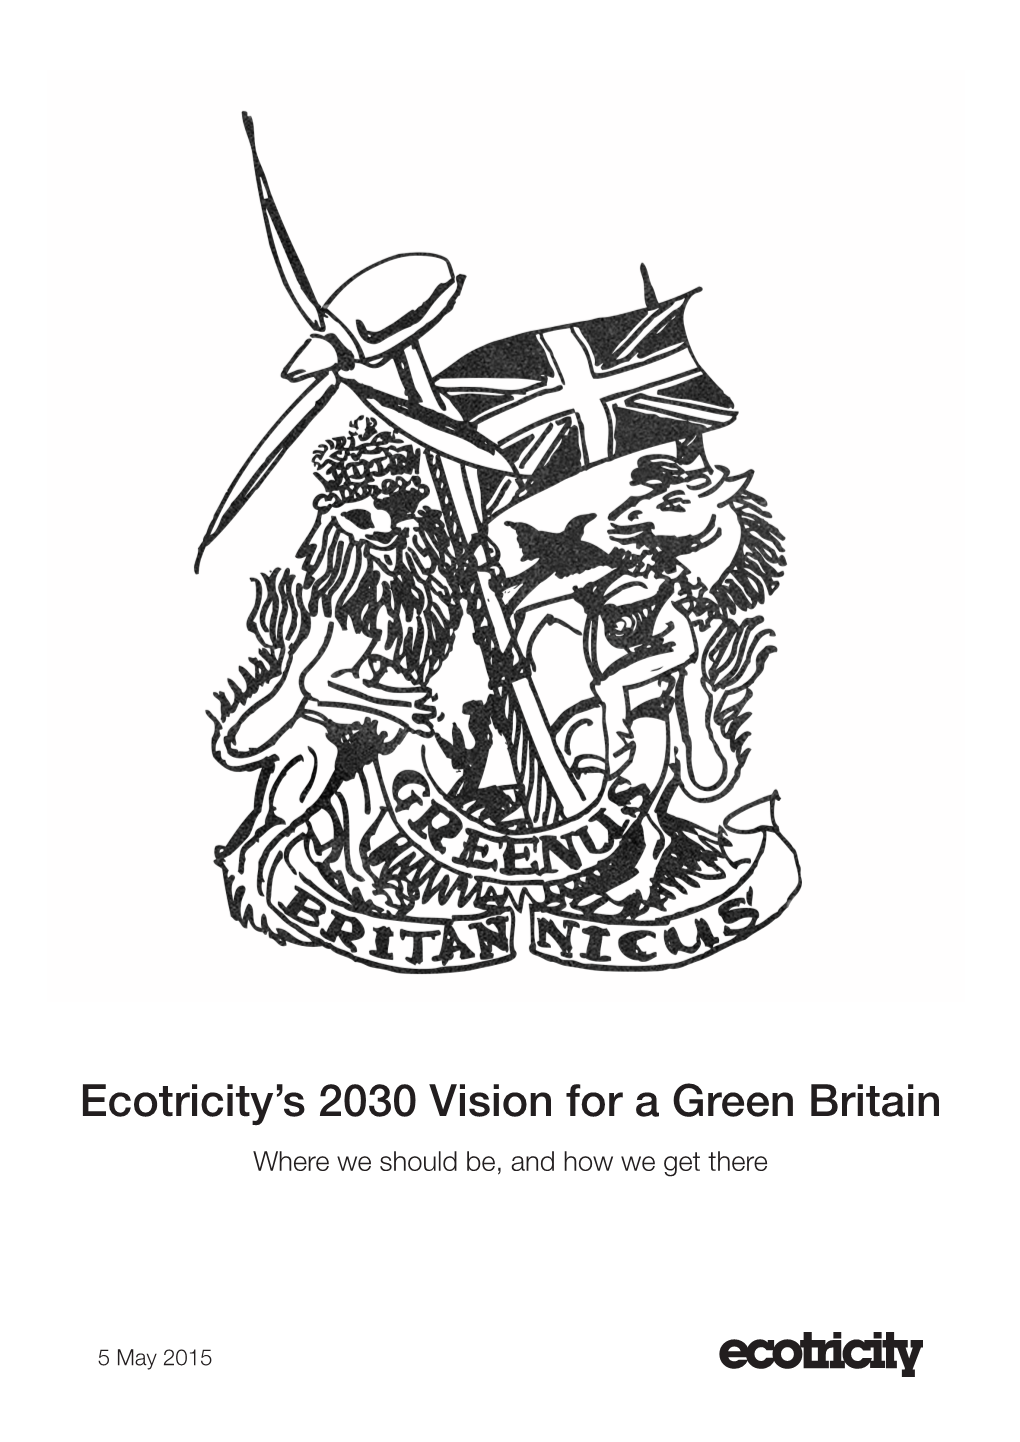 Ecotricity's 2030 Vision for a Green Britain